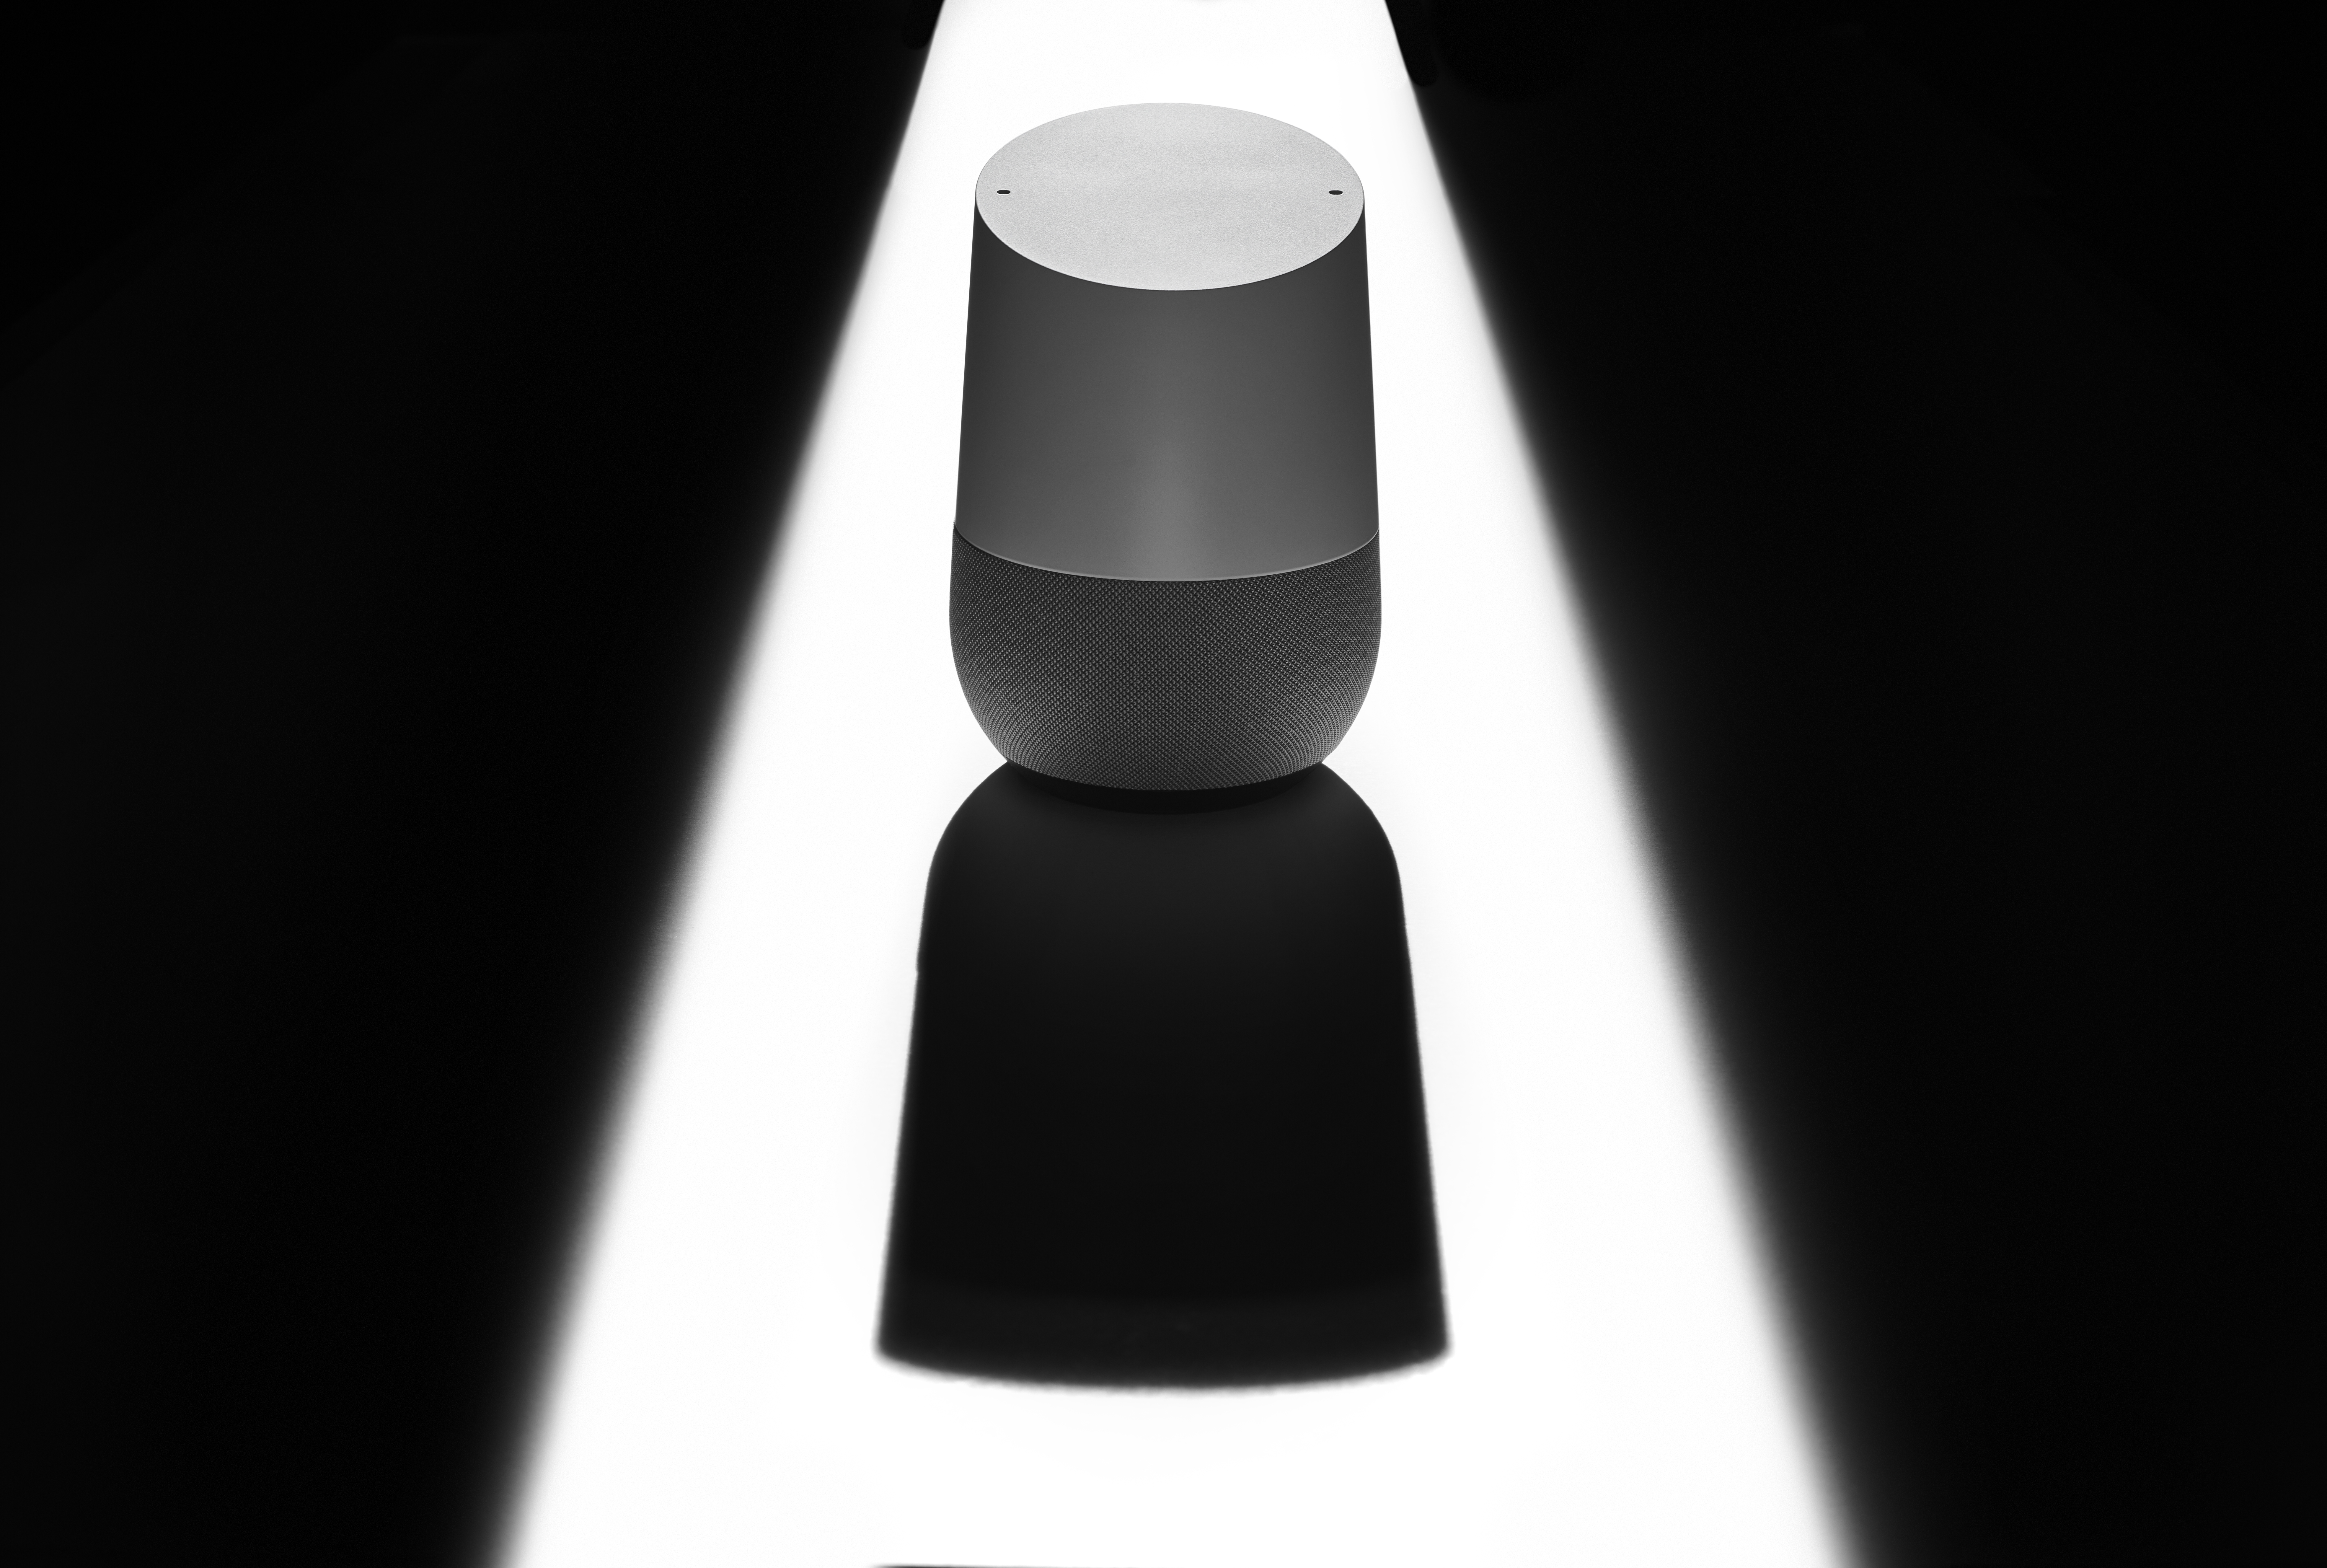 A Google Home smart speaker casting a sinister shadow, to represent issues of privacy and security.